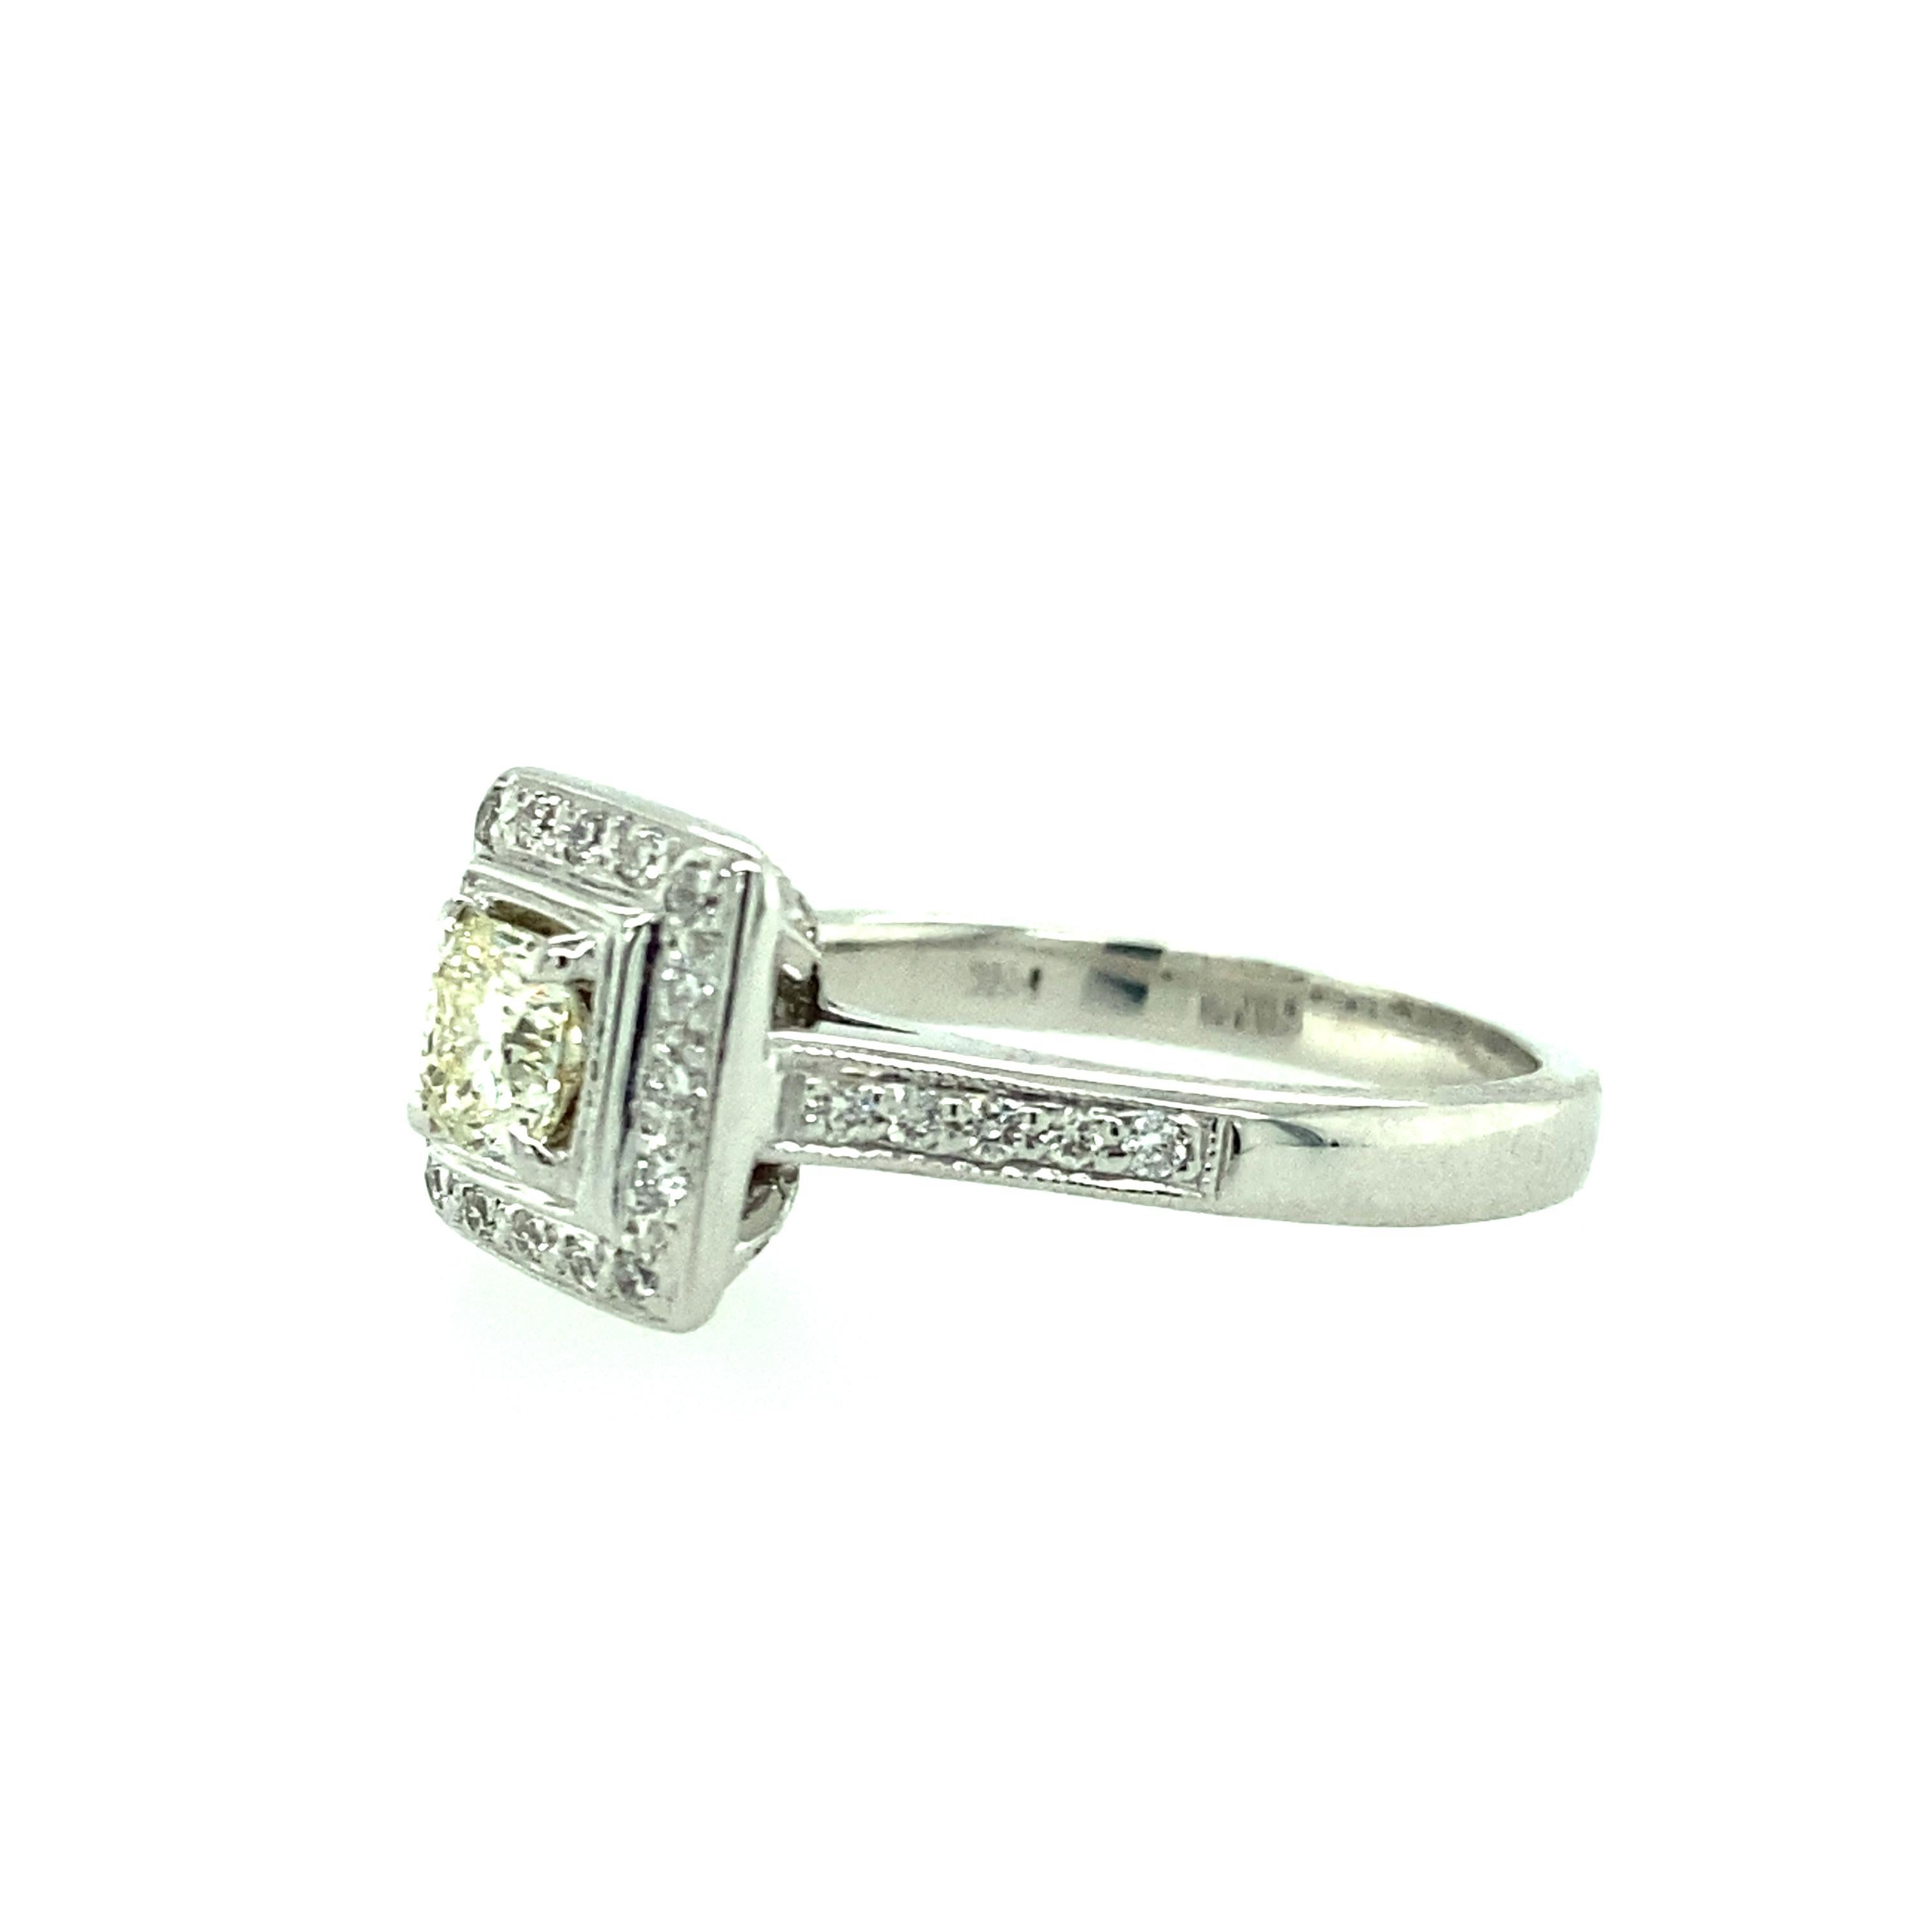 One 14 karat white gold (stamped 14K) engagement ring set with one cushion cut diamond, 0.51 carat total weight with O color and VS2 clarity.  The ring is surrounded by thirty-six round brilliant diamonds, 0.34 carat total weight with matching I/J